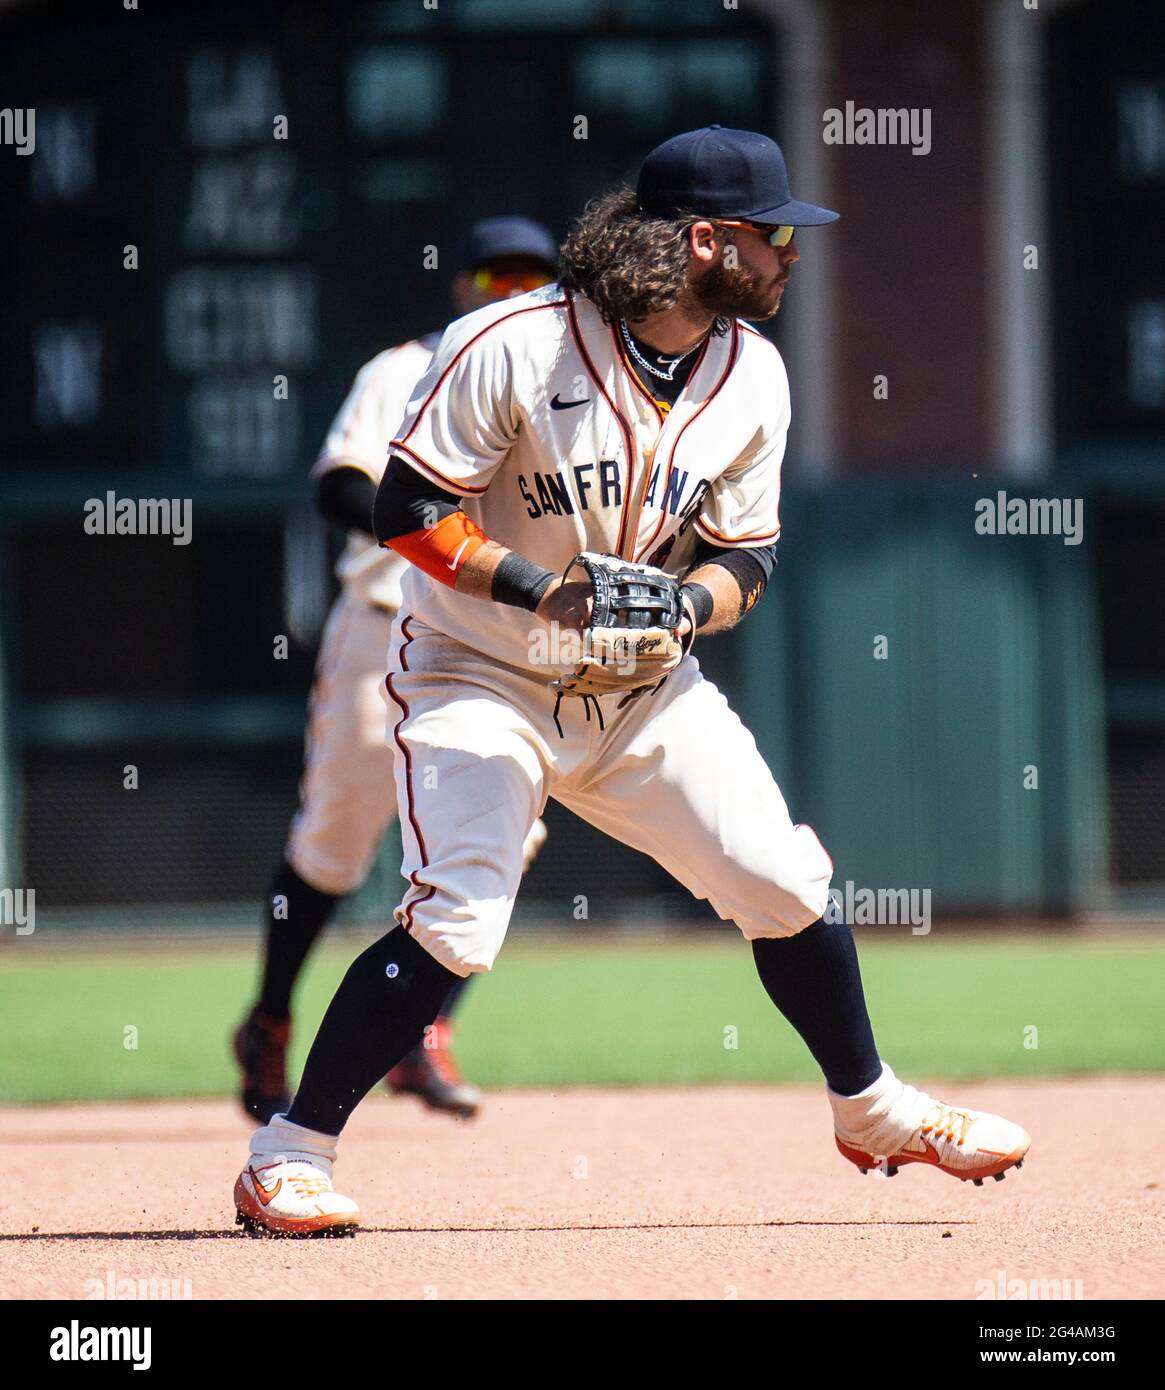 11 Years in, Brandon Crawford is Breaking Out - May 21, 2021